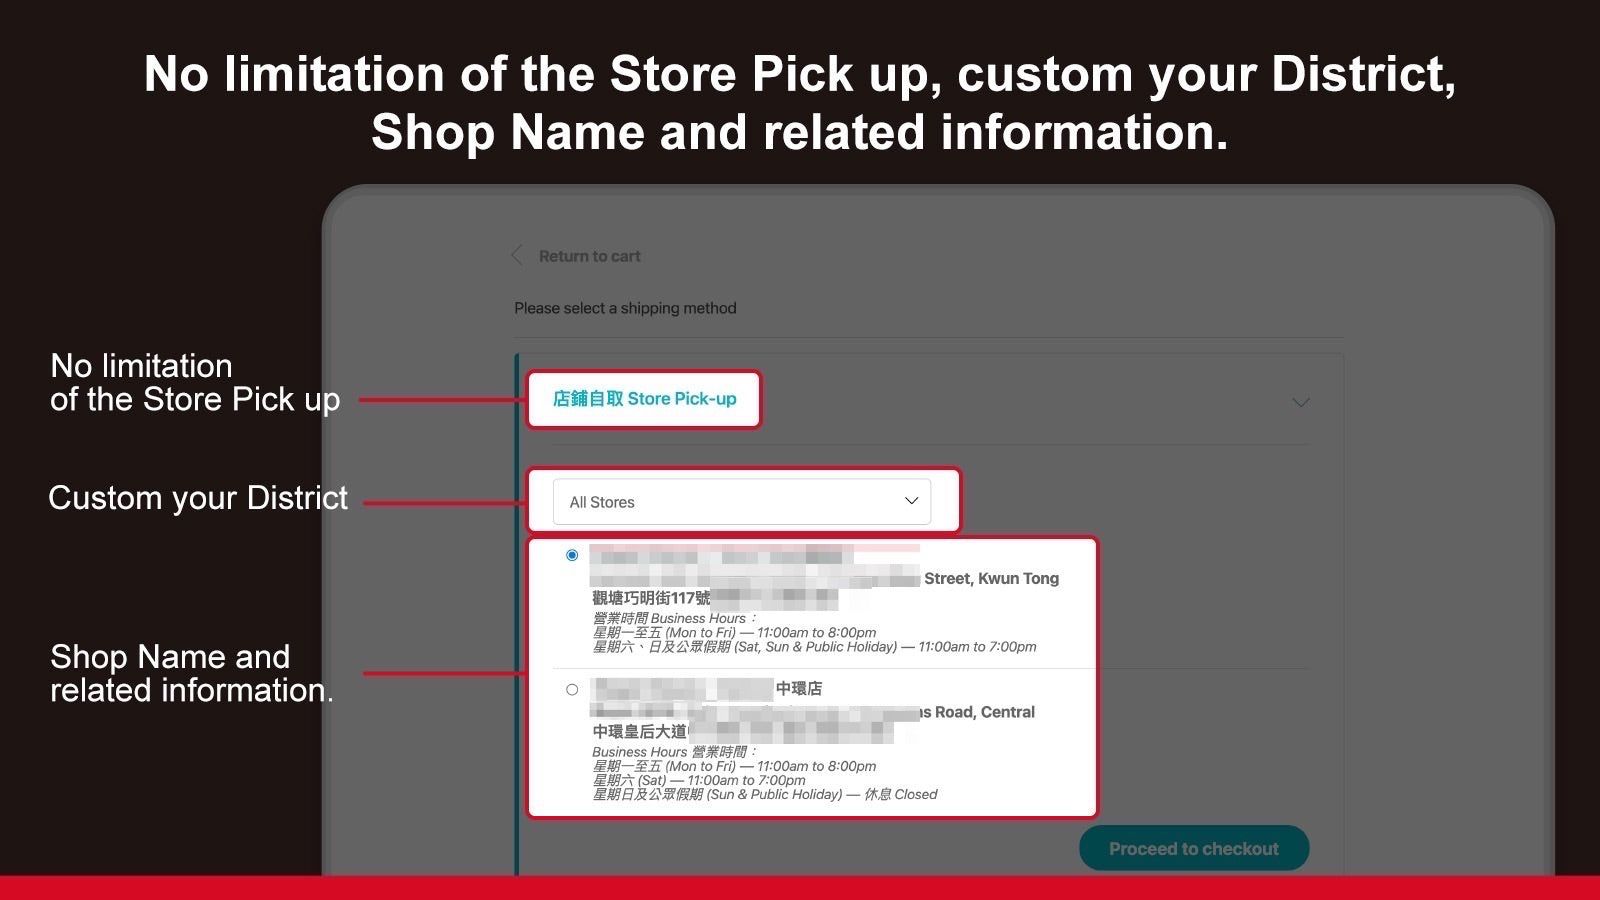 Let customers select your store as pickup location